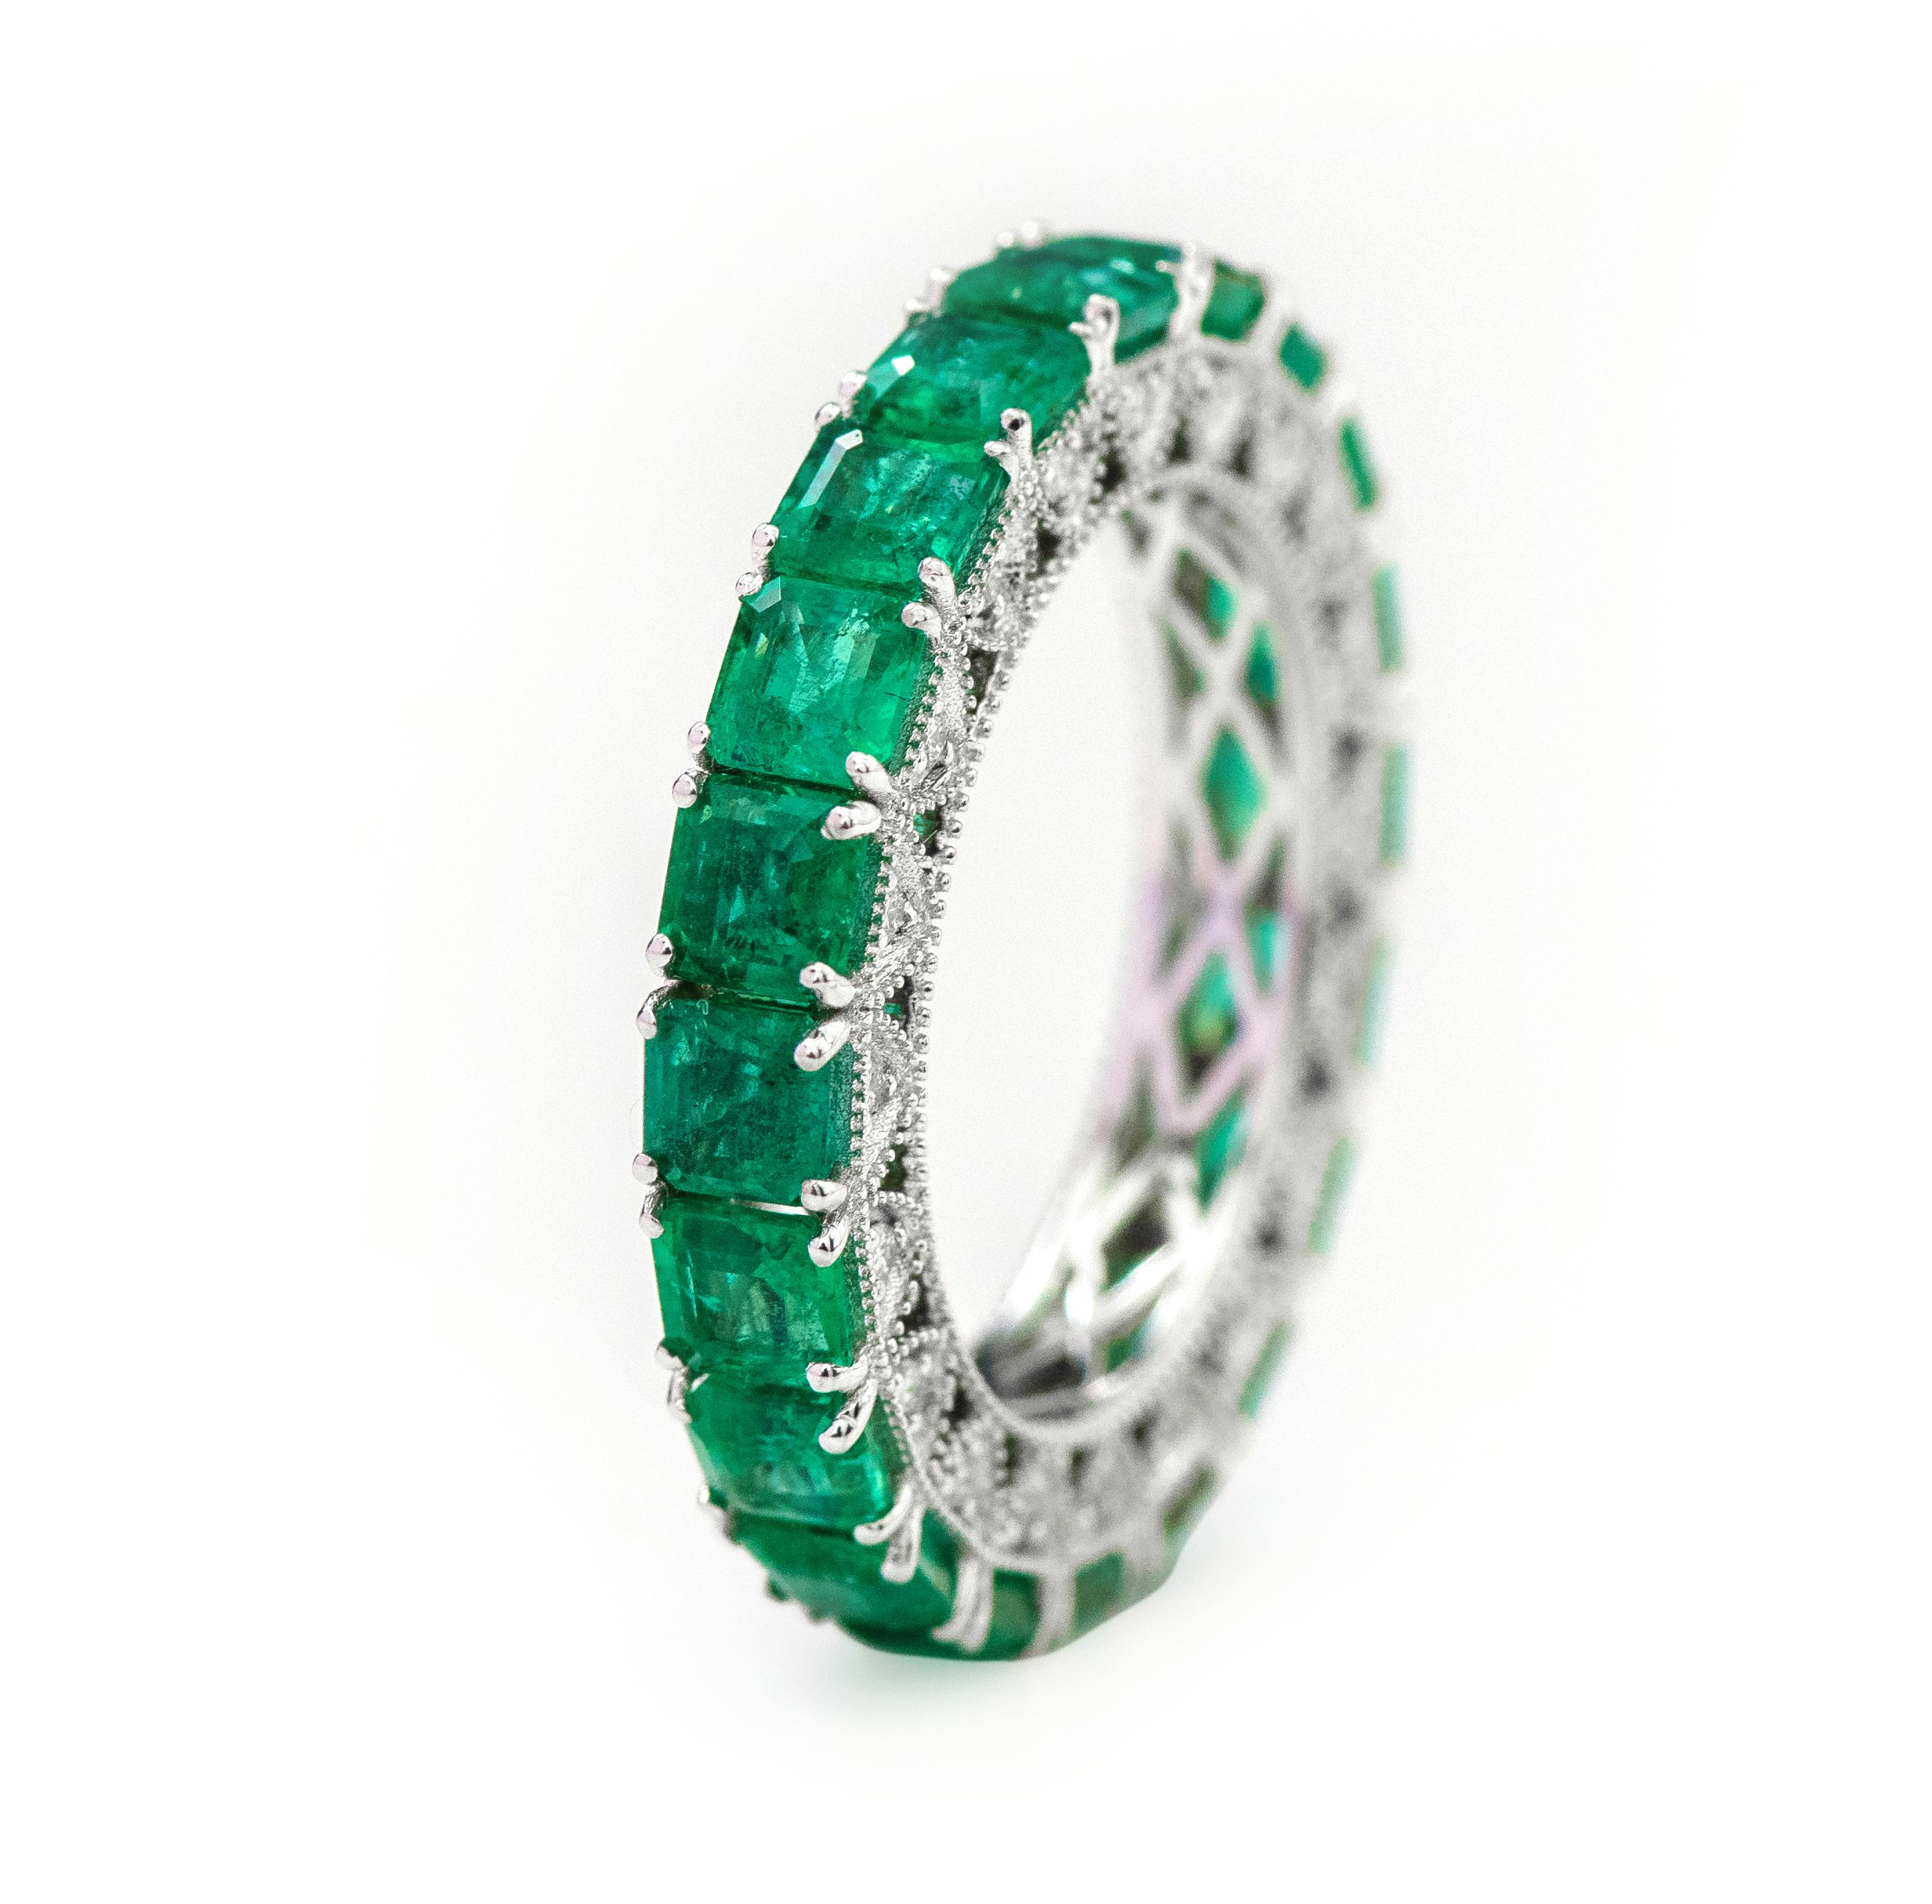 18 Karat White Gold 5.34 Carat Emerald-Cut Natural Emerald and Diamond Eternity Band Ring

This impressive parakeet green emerald and side diamond band is alluring. The solitaire vertically placed emerald-cut emeralds in grain prong white gold